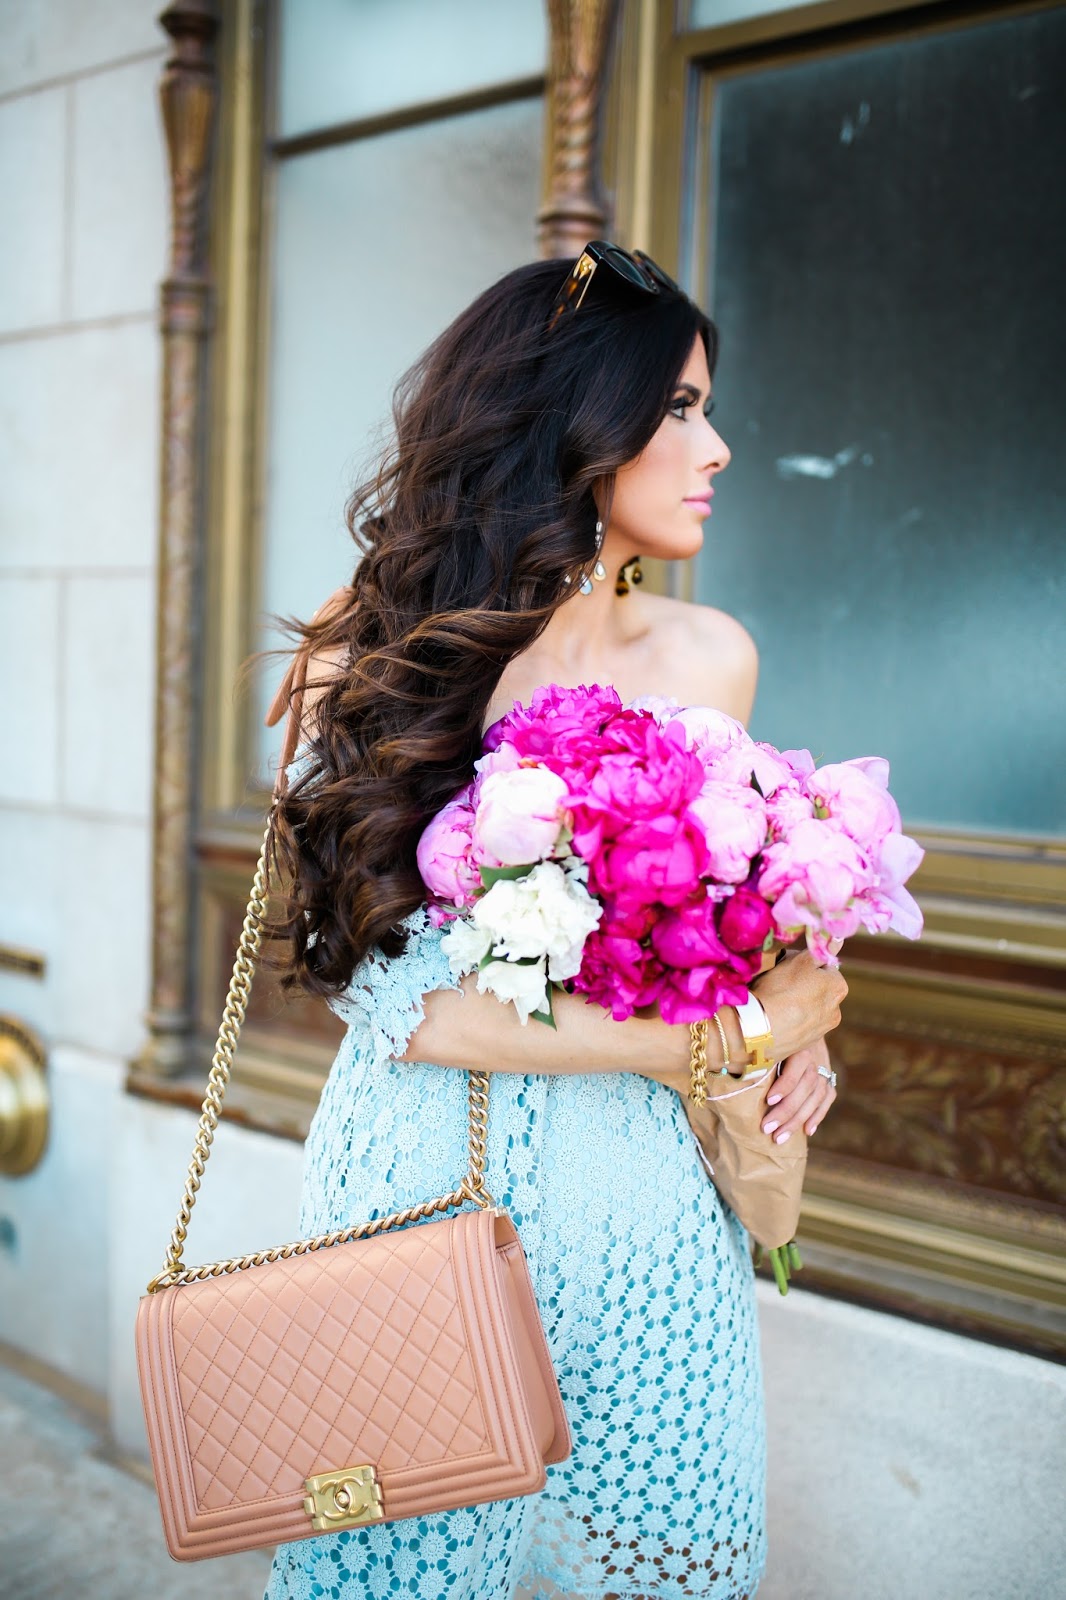 The Dress To Wear for Attending a Summer Wedding | The Sweetest Thing